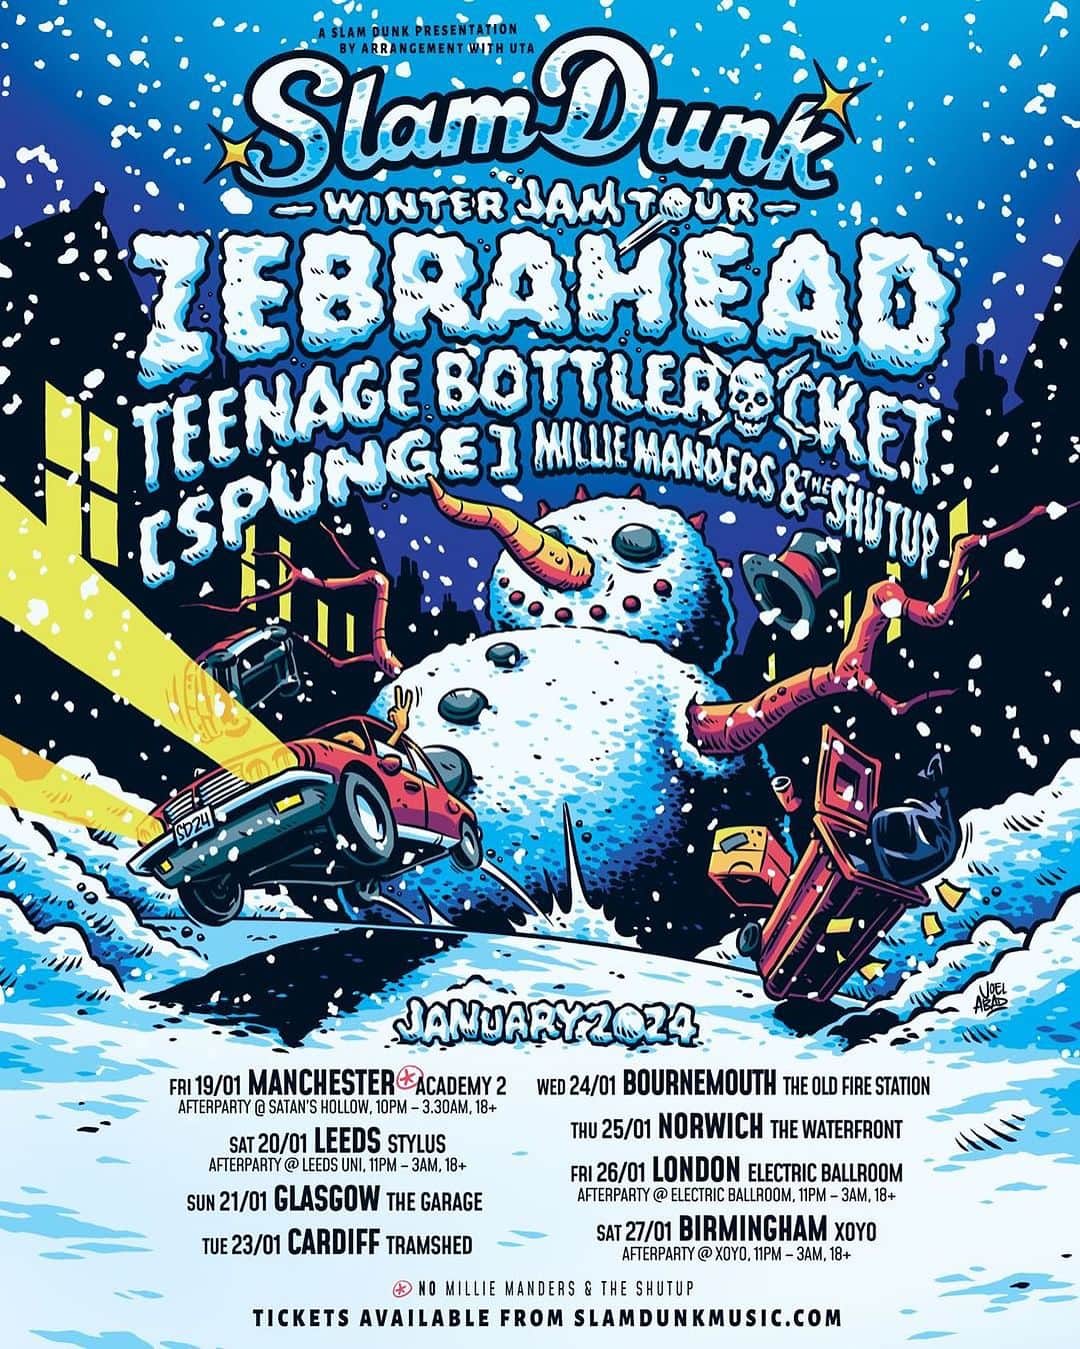 Zebraheadのインスタグラム：「Currently writing songs and recording soon.... Next tour is on sale now!  Get your tickets.  Maybe we play a new song on this tour...like we did with "All My Friends Are Nobodies" in the UK before it came out??? Finally heading back to the UK for headline shows.... It has been a while!!! GET YOUR TICKETS ASAP  SLAMDUNK WINTER JAM TOUR Fri 19 Jan - Manchester - Academy 2 Sat 20 Jan - Leeds - Stylus Sun 21 Jan - Glasgow - The Garage Tue 23 Jan - Cardiff - Tramshed Wed 24 Jan - Bournemouth - The Old Fire Station Thu 25 Jan - Norwich - Waterfront Fri 26 Jan - London - Electric Ballroom Sat 27 Jan - Birmingham - XOYO  #zebrahead #winterjamtour #teenagebottlerocket #spunge #milliemandersandtheshutup #slamdunktour #uk」